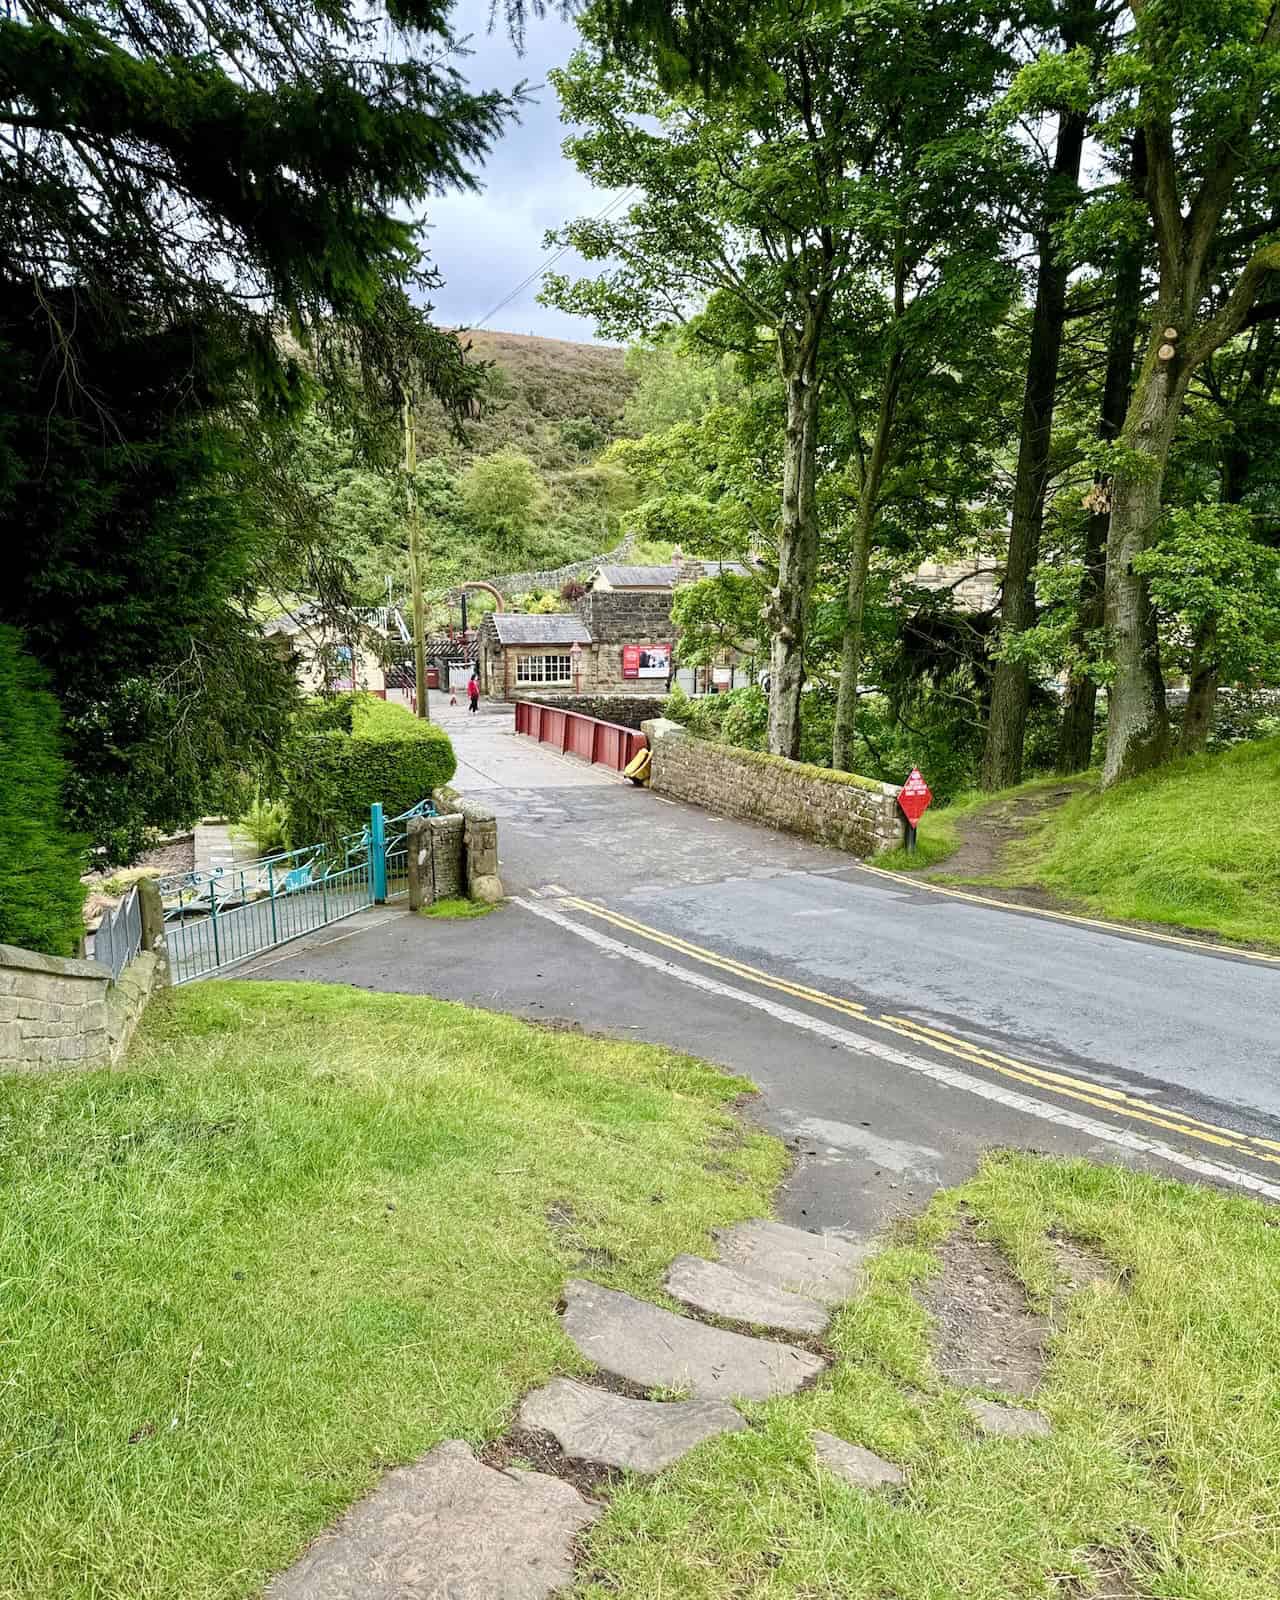 View of the road and steps leading to Goathland Railway Station. A fantastic place to explore before continuing the Goathland to Grosmont walk.